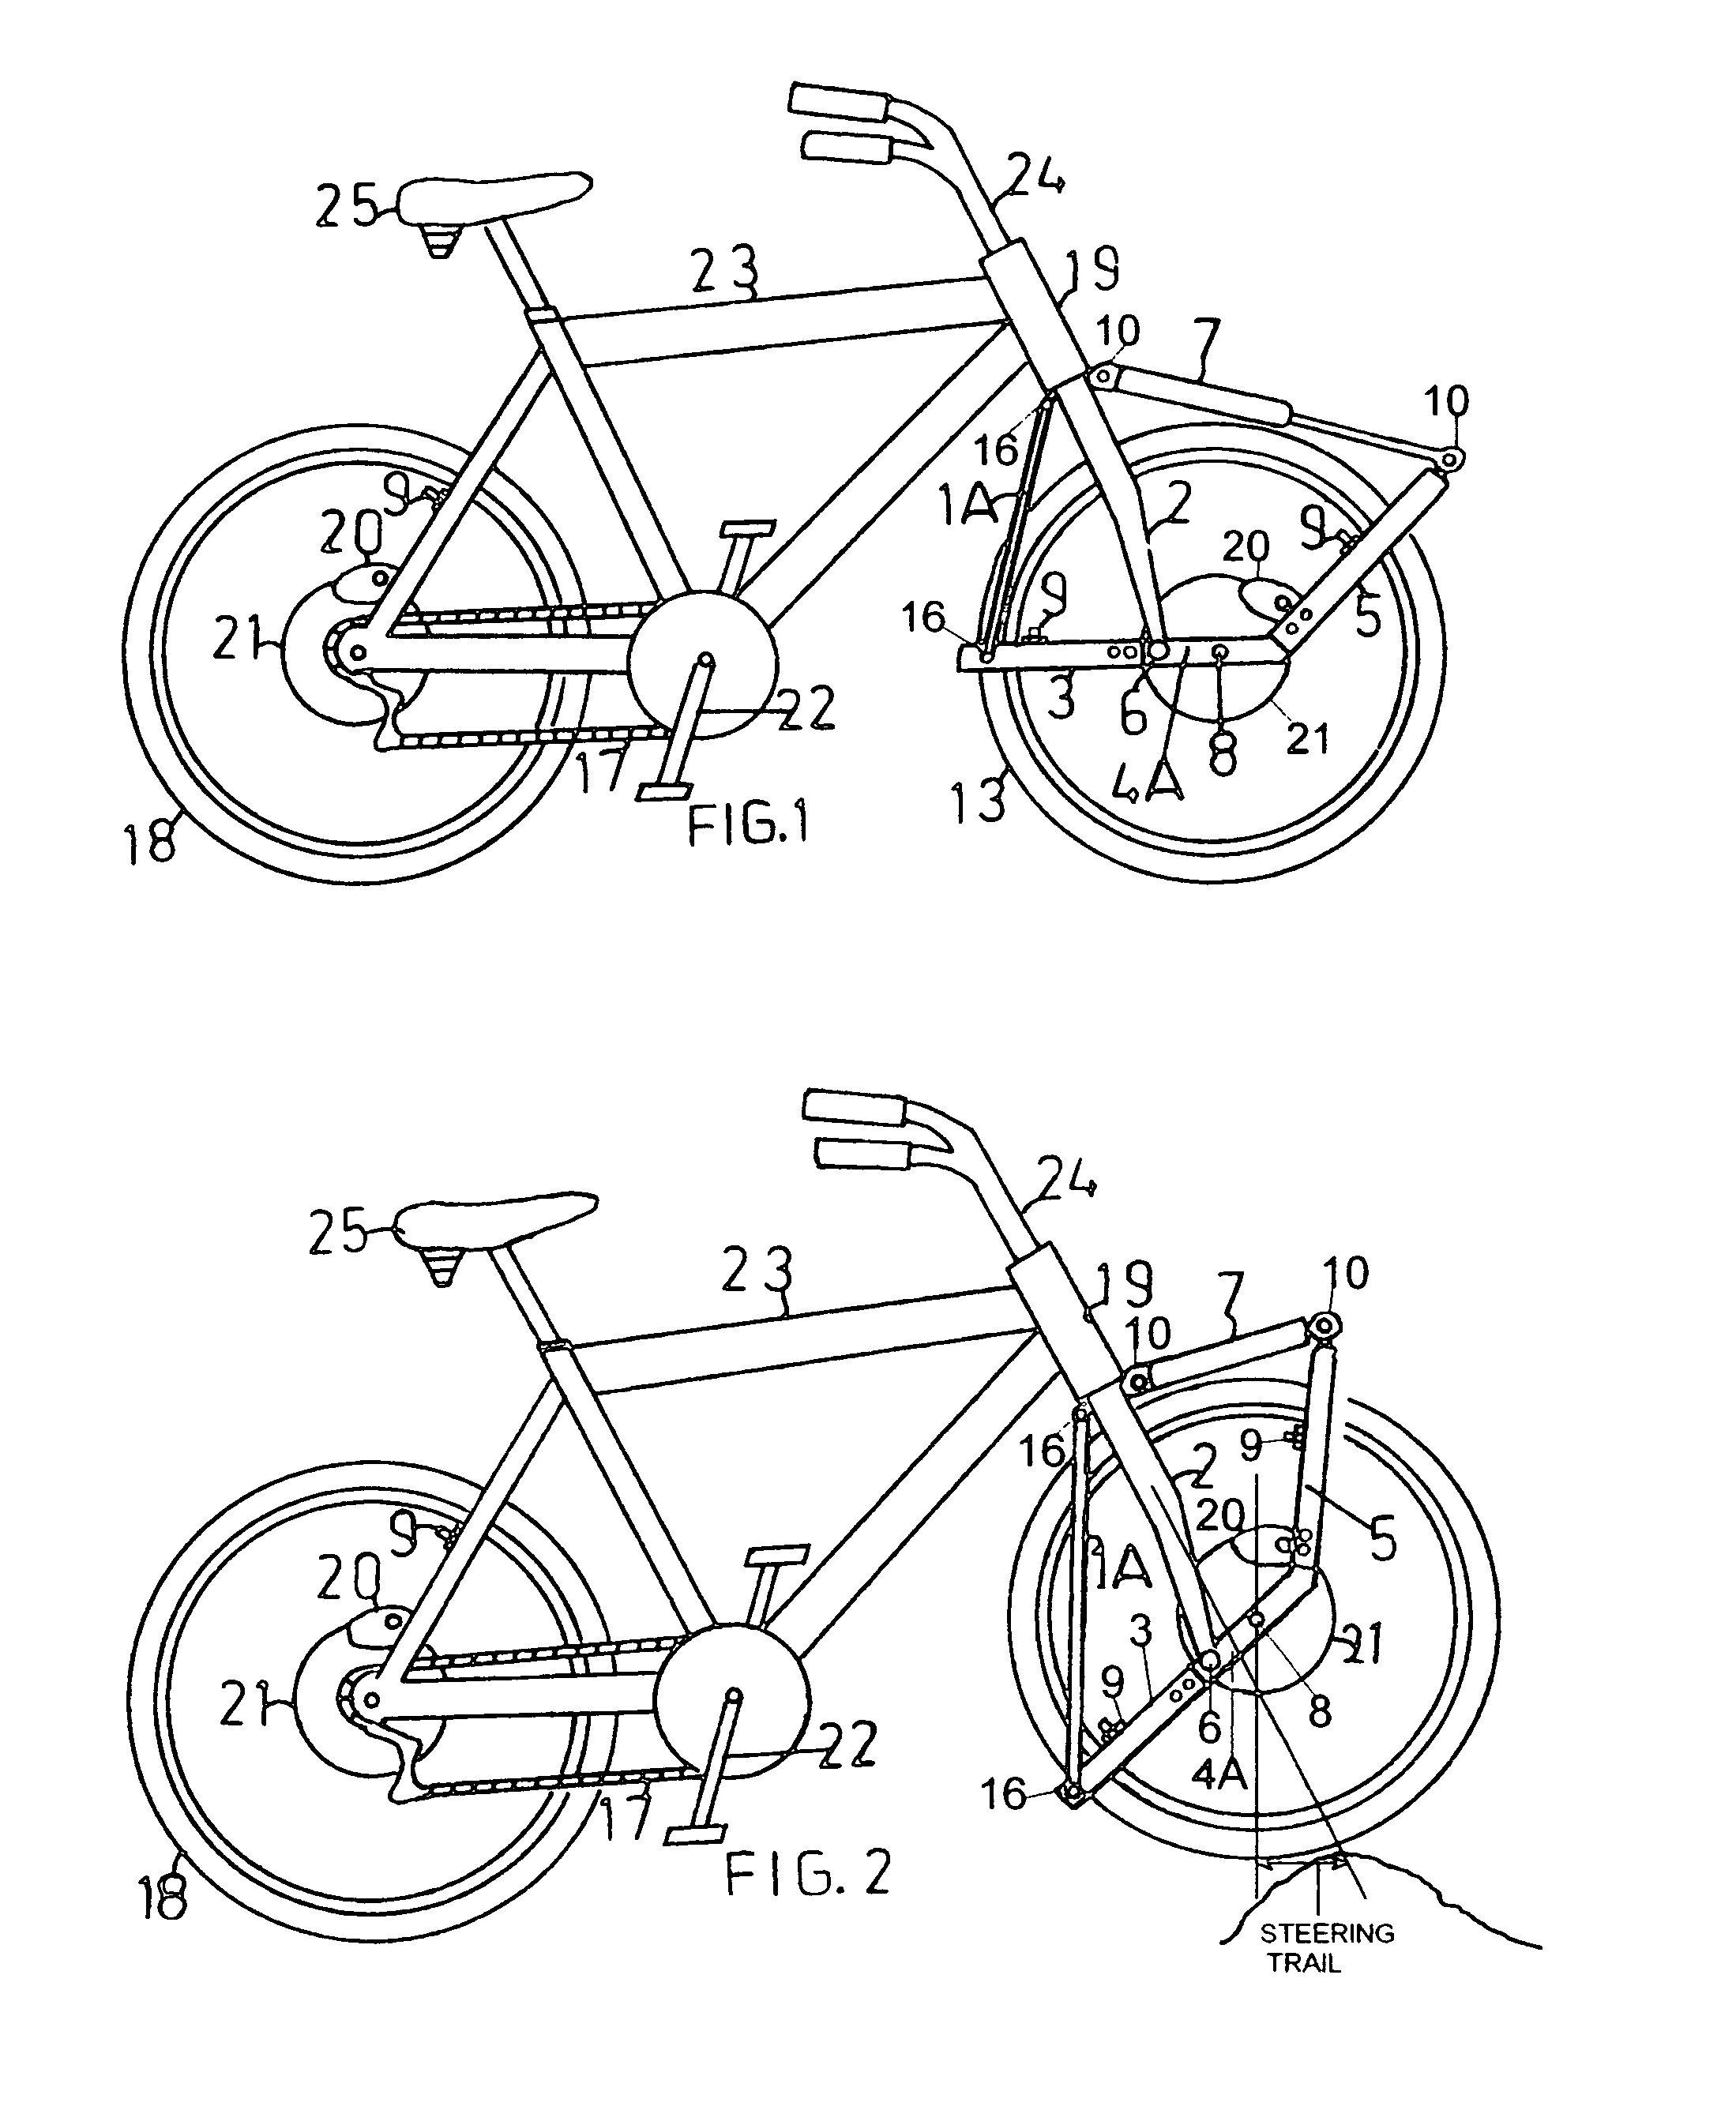 Steerable leveraged suspension system suitable for use on a bicycle